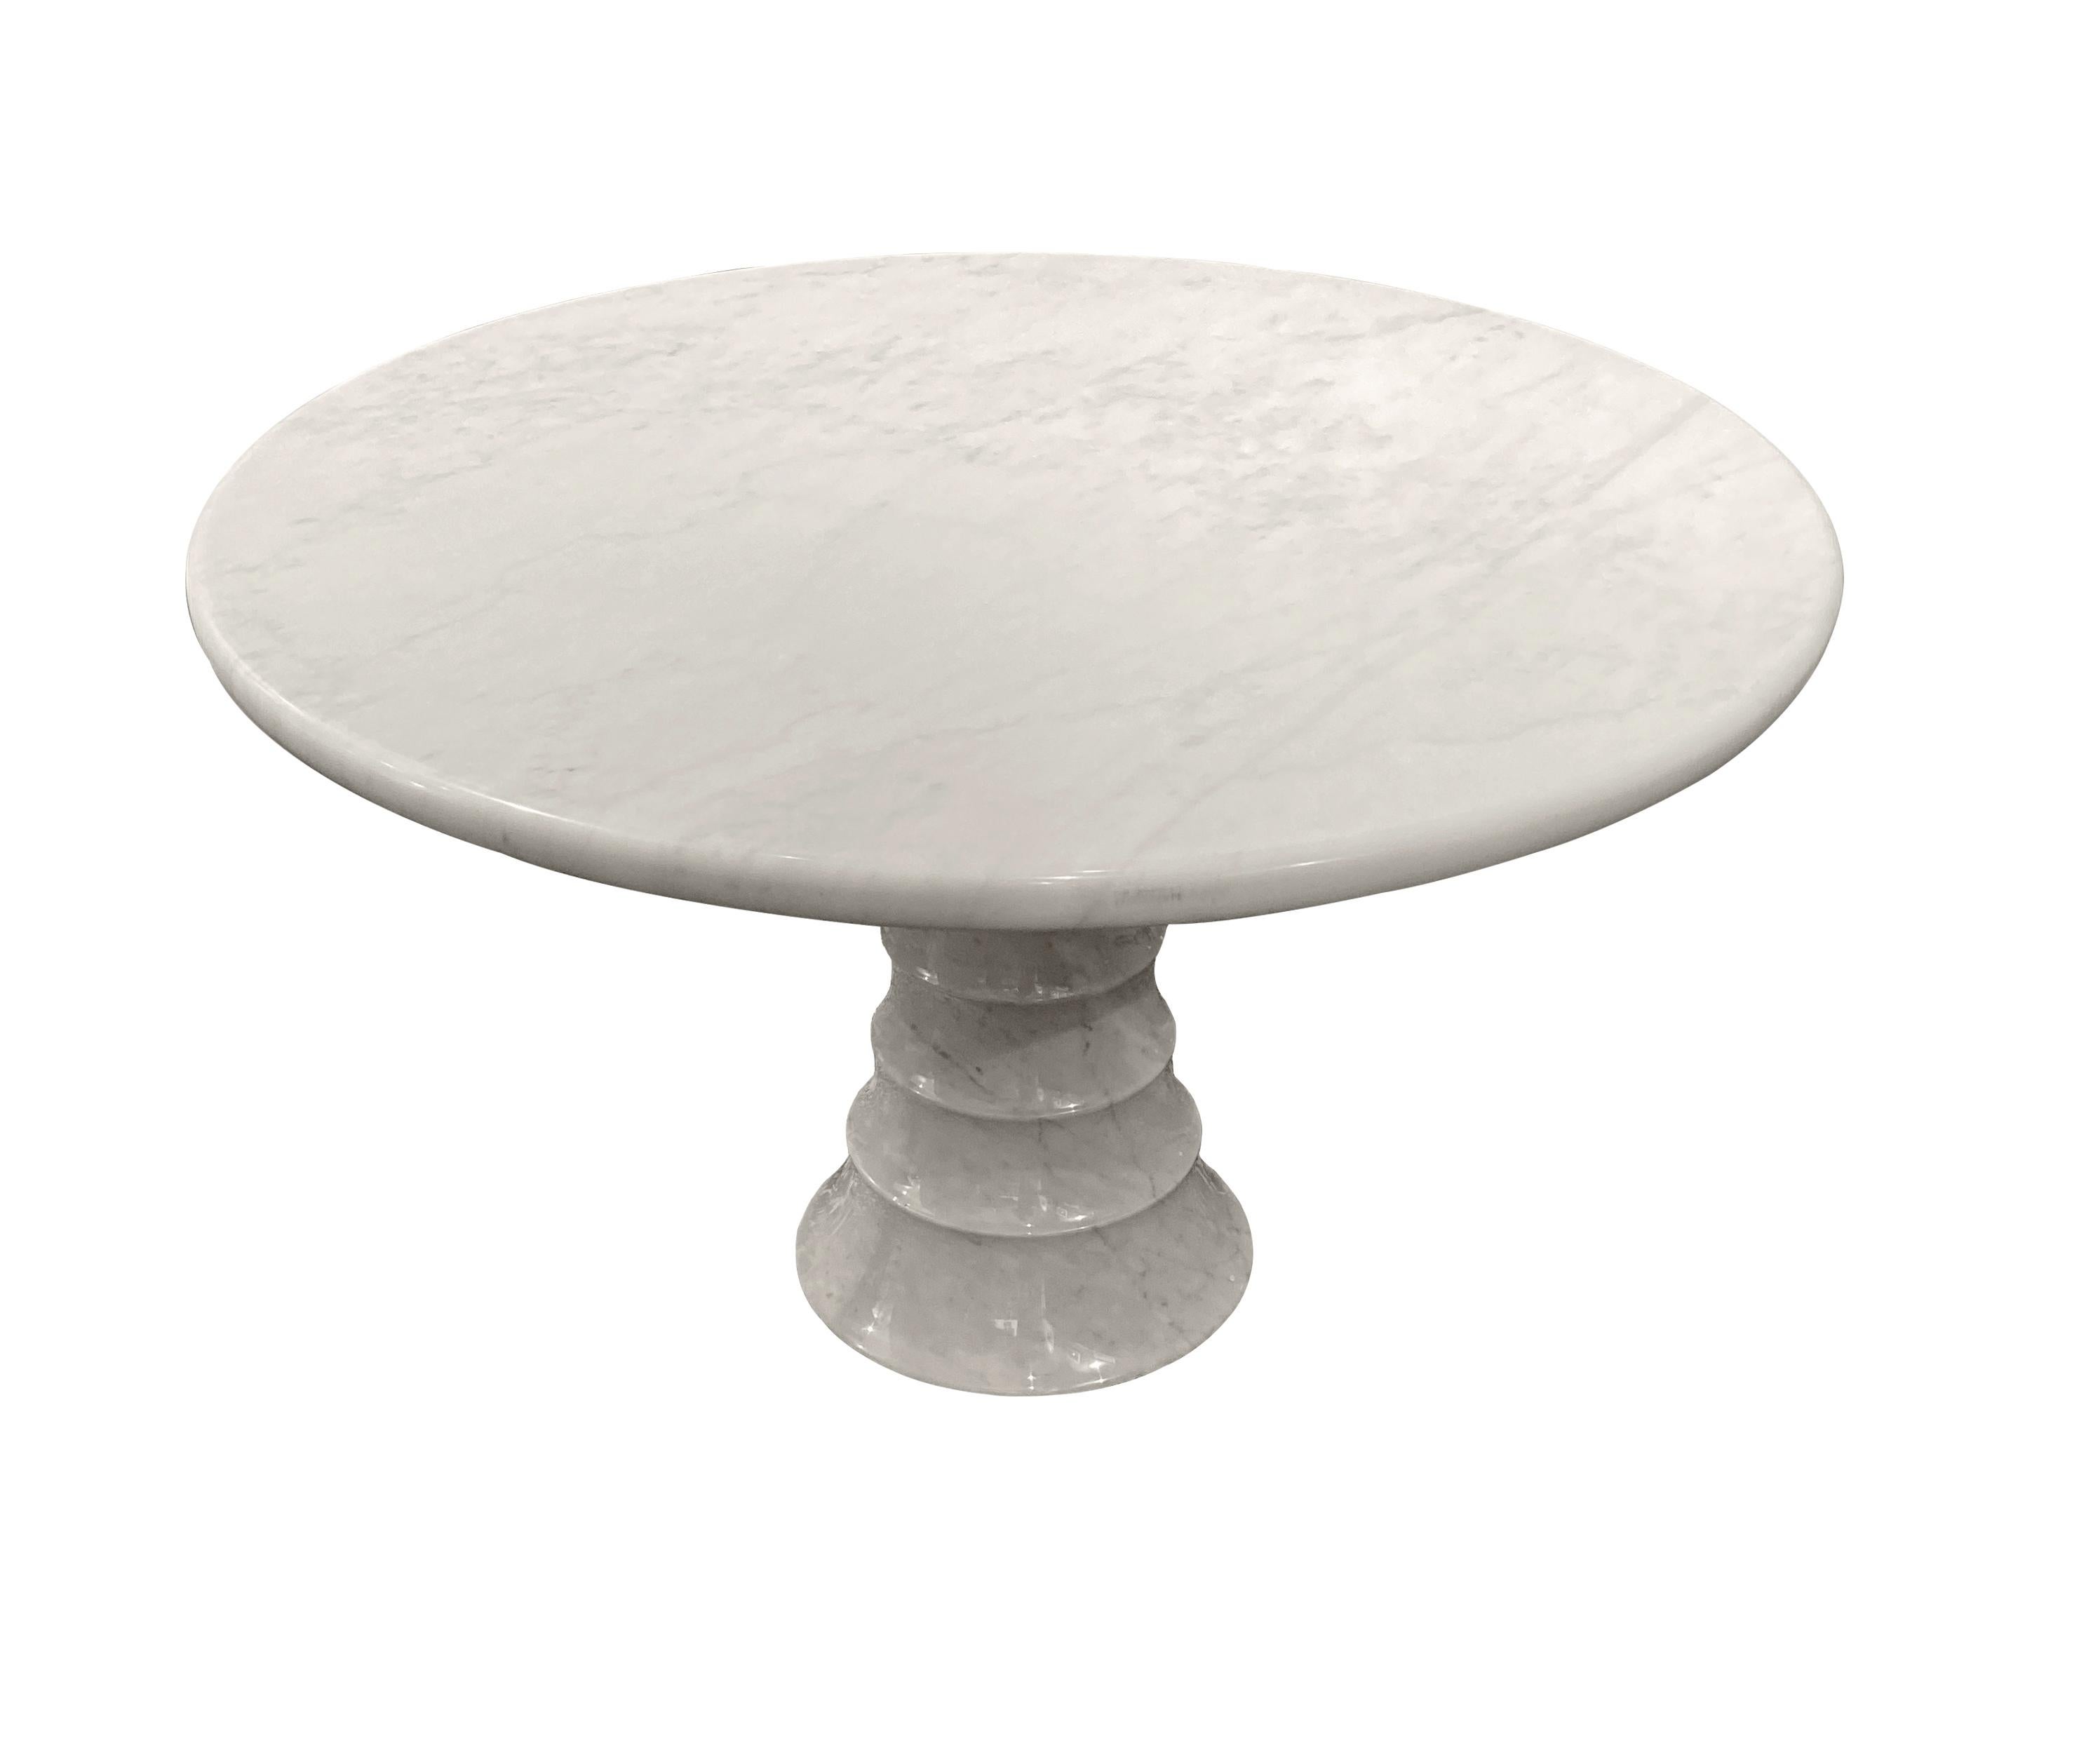 Spectacular round Carrara marble dining table with spiral base, Italian design, circa 70  

The top and the base are dissociable. In perfect condition. 

Measures:
Diameter : 120 cm 
Height : 73 cm 